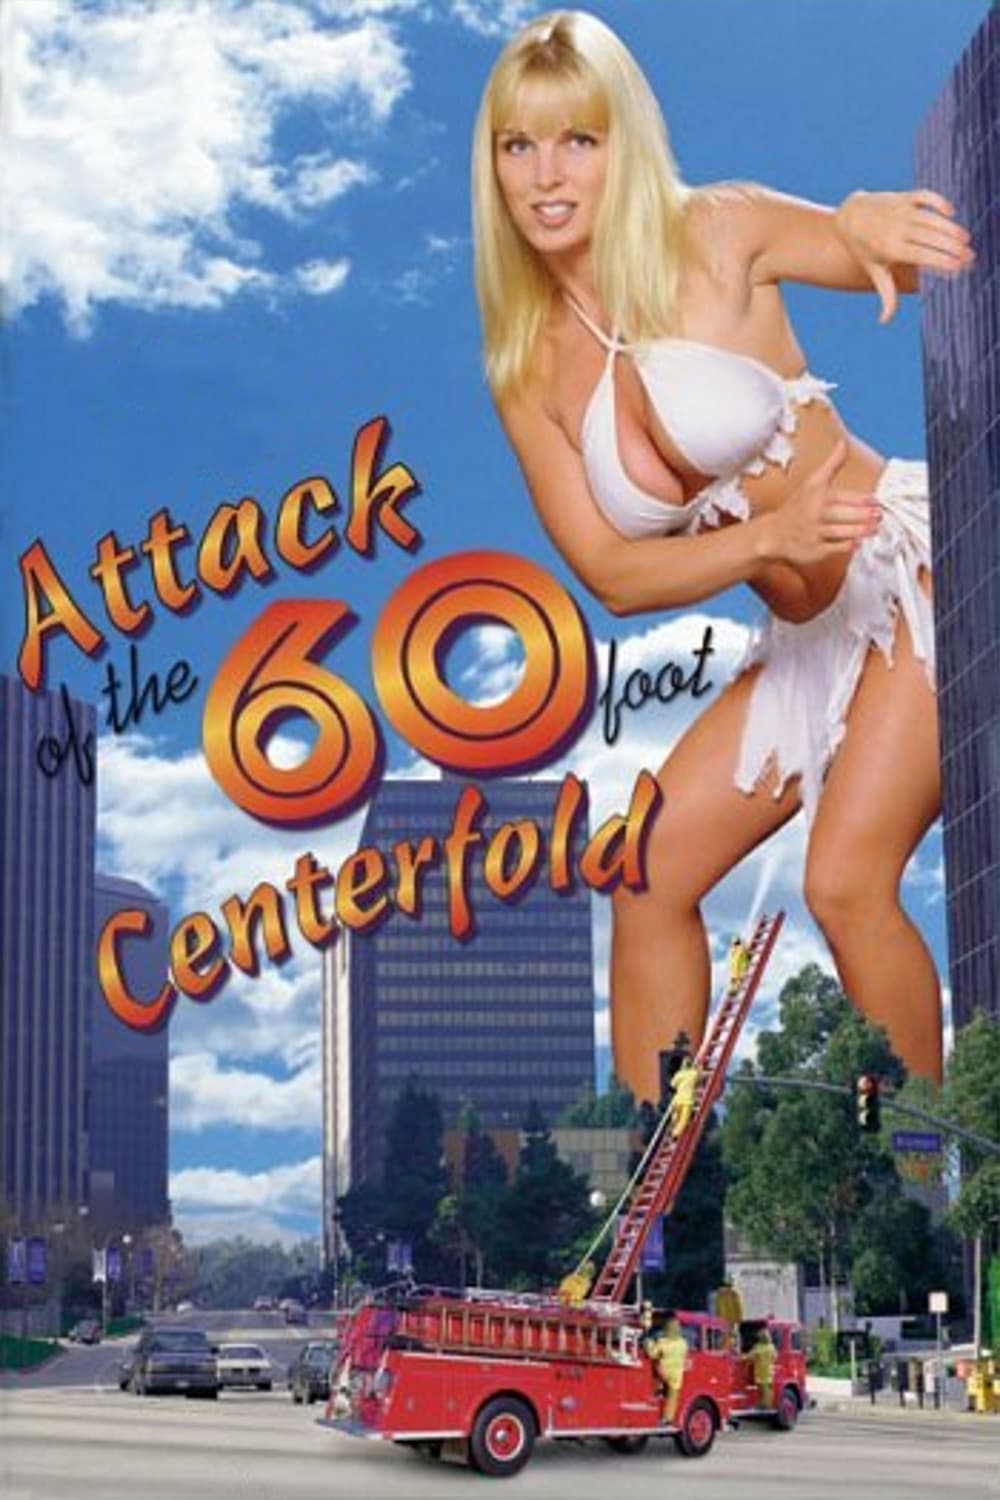 Attack of the 60 Foot Centerfold (1995)